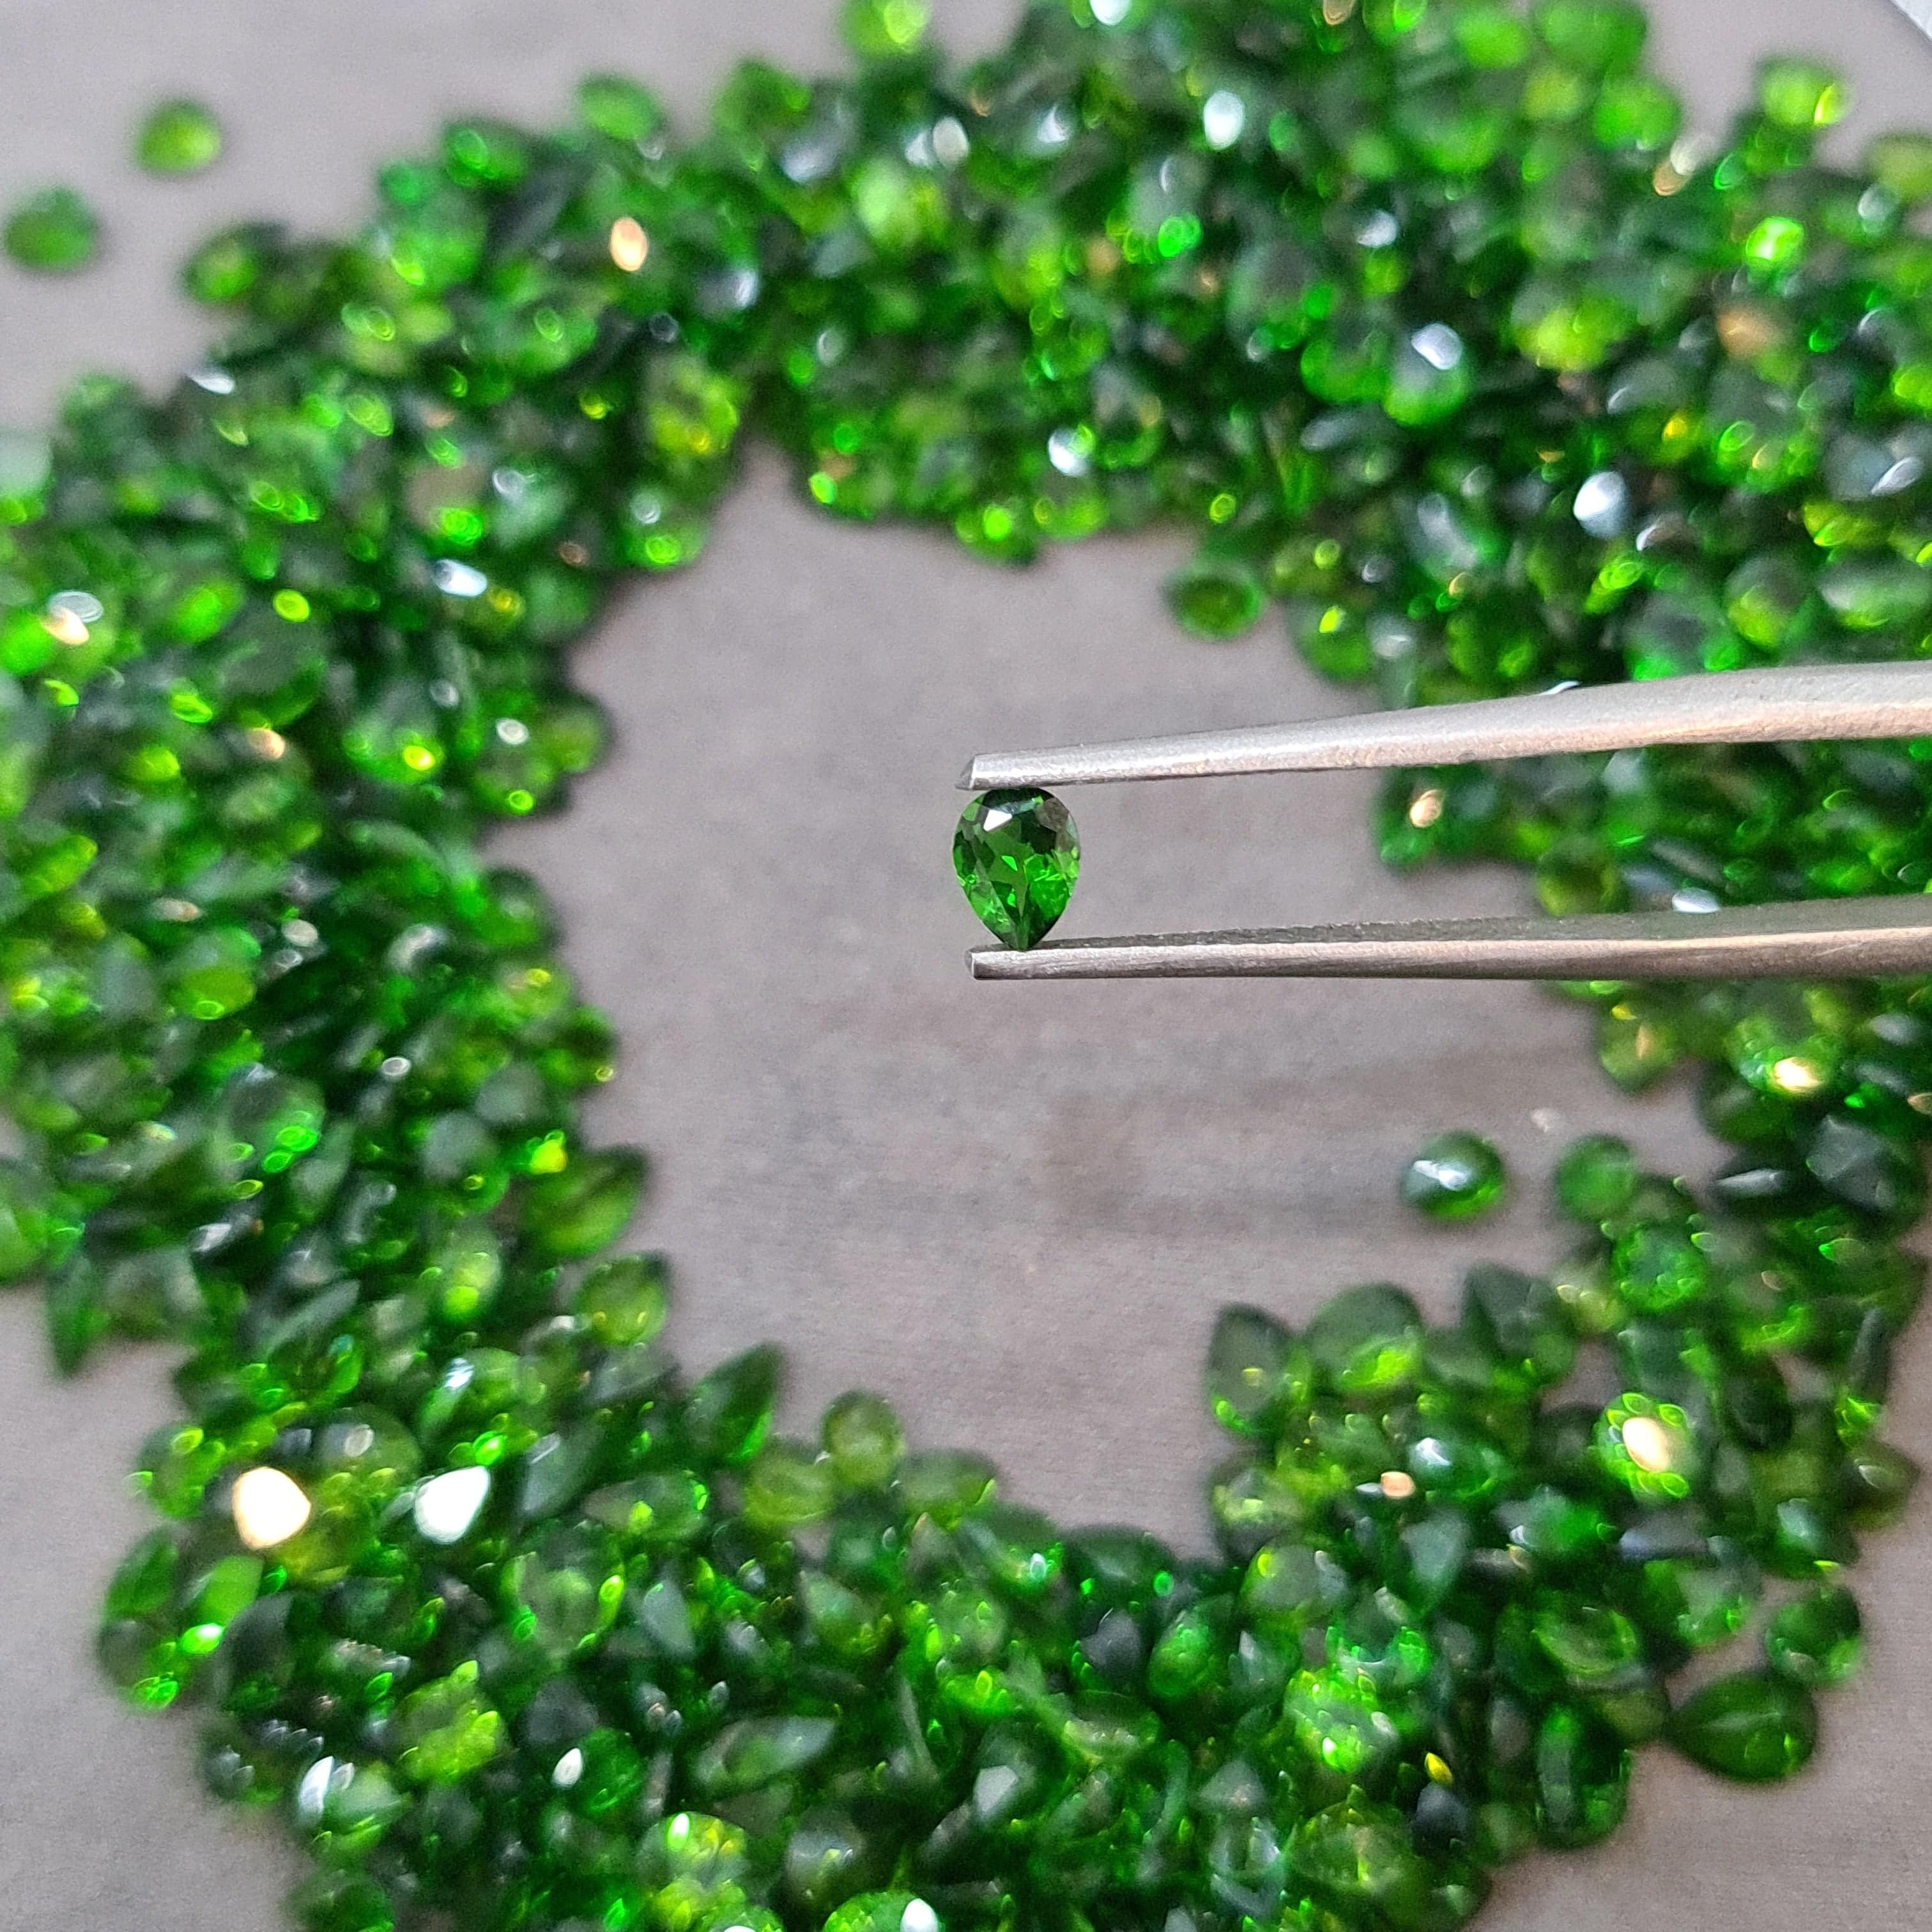 5 Cts of Chrome Diopside Flawless | Pear Shapes 3-5mm - The LabradoriteKing